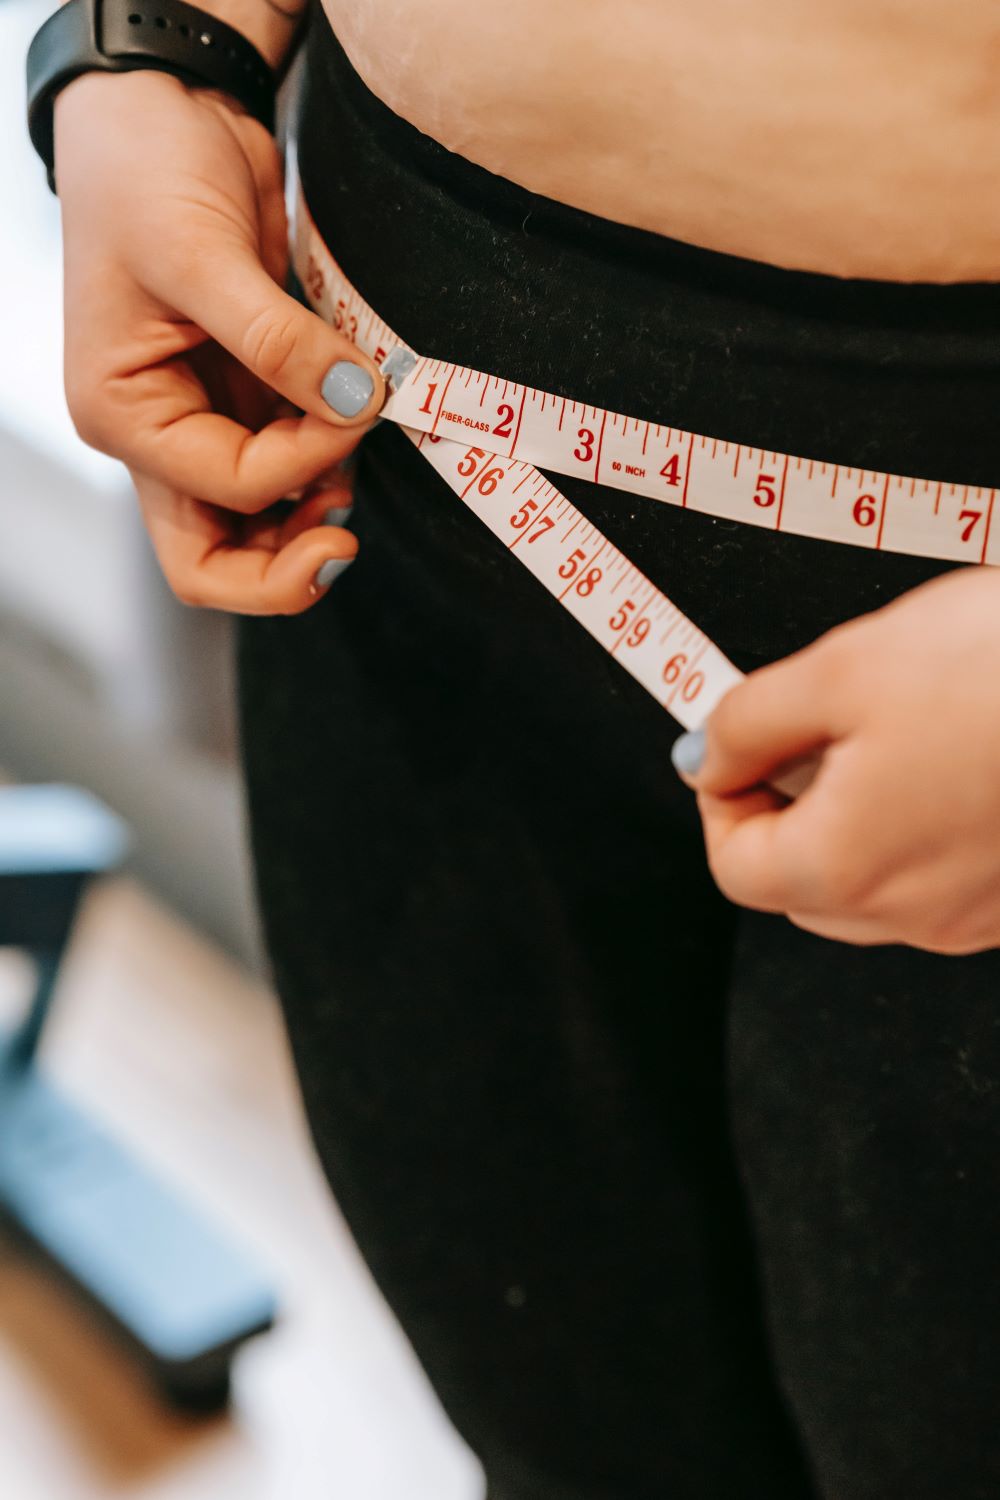 Social Supports Can Sabotage a Person's Weight Loss Goals